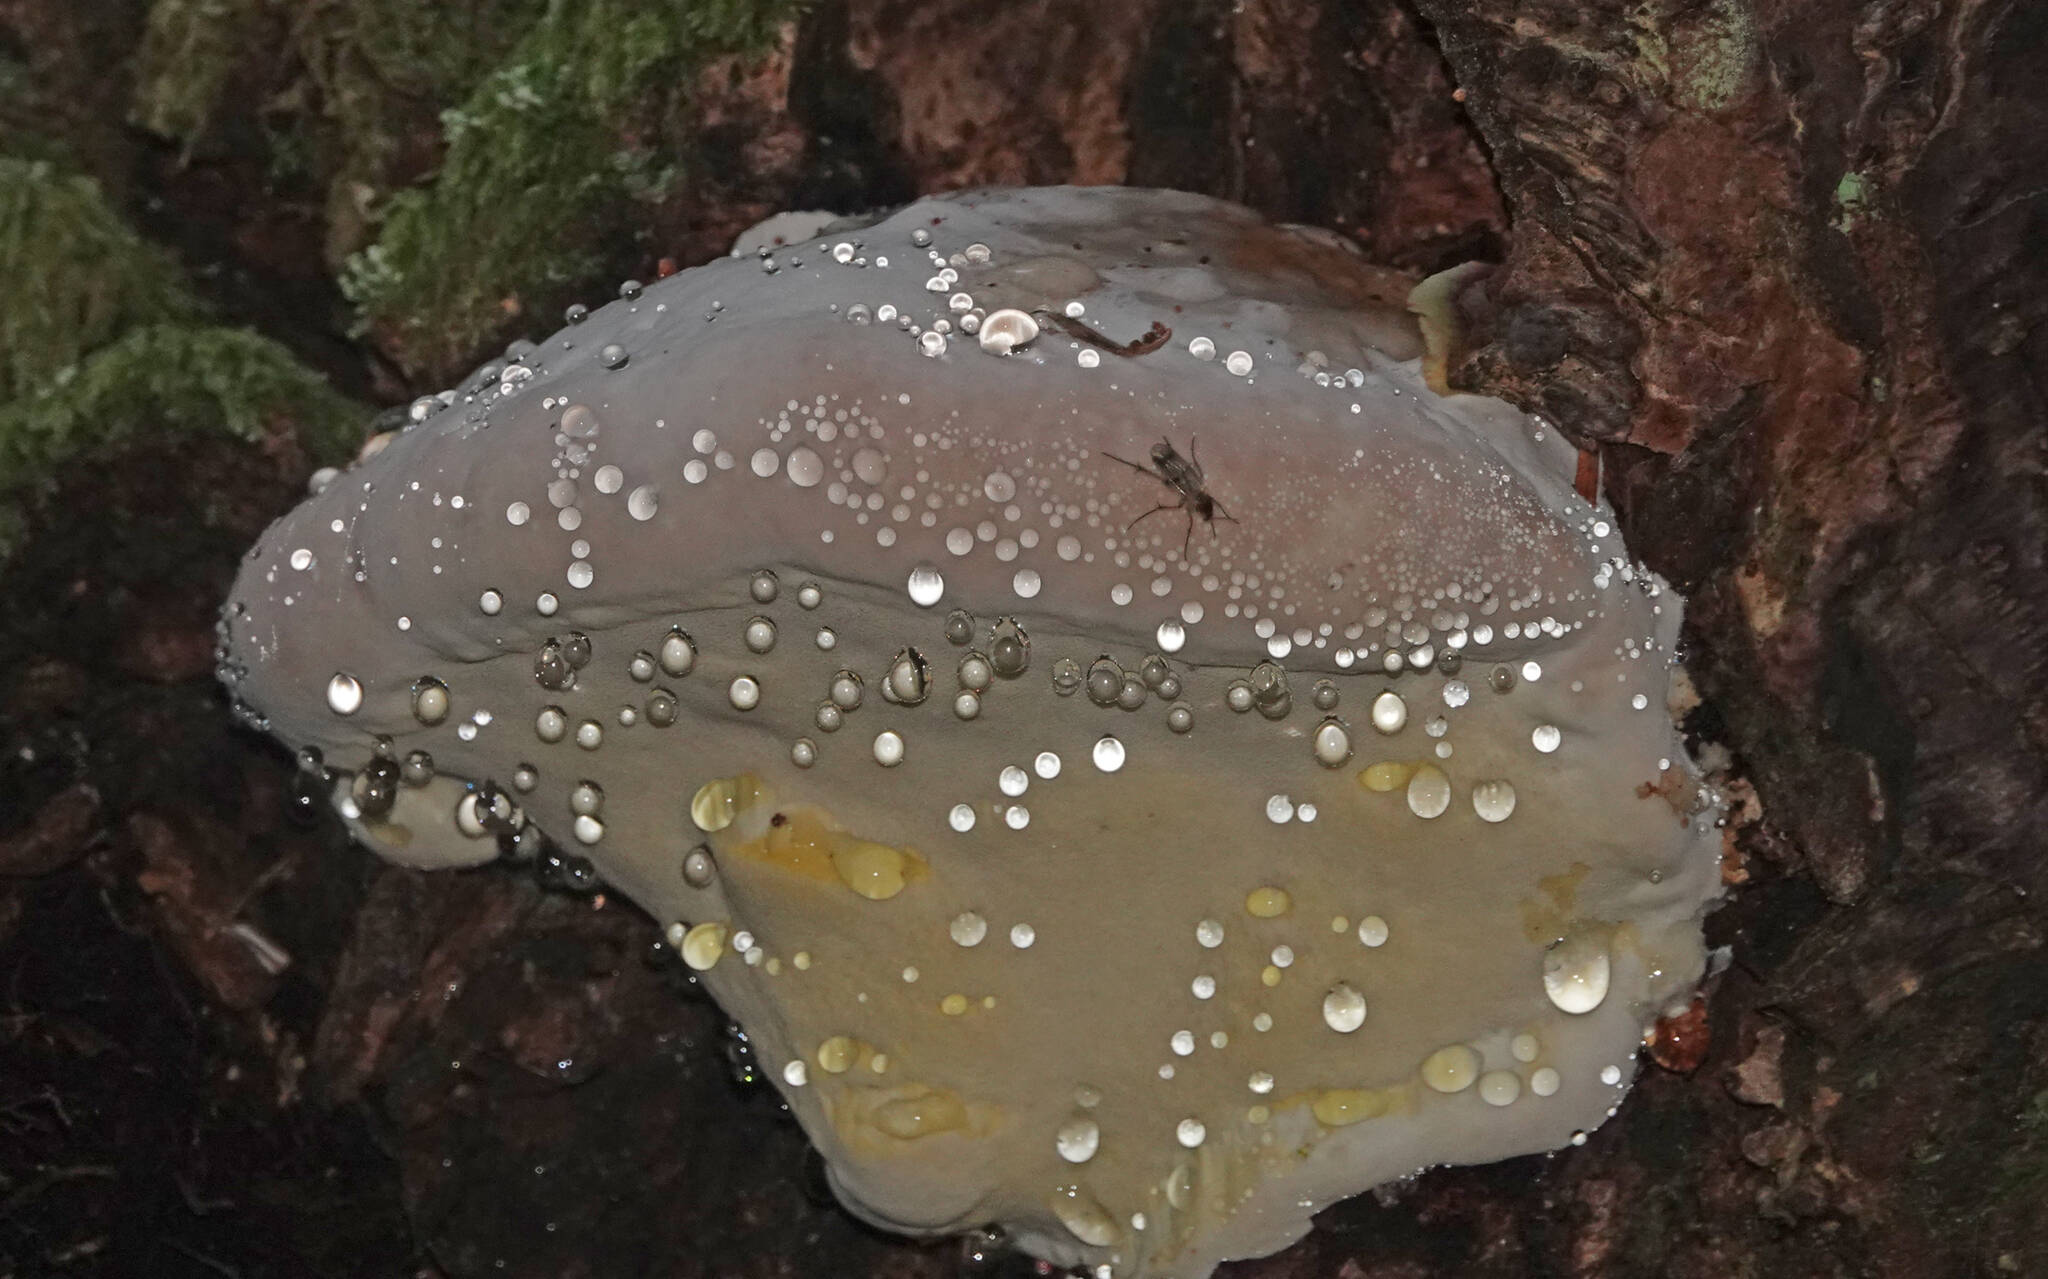 A bracket fungus exudes guttation drops and a small fly appears to sip one of them.( Courtesy Photo / Bob Armstrong)